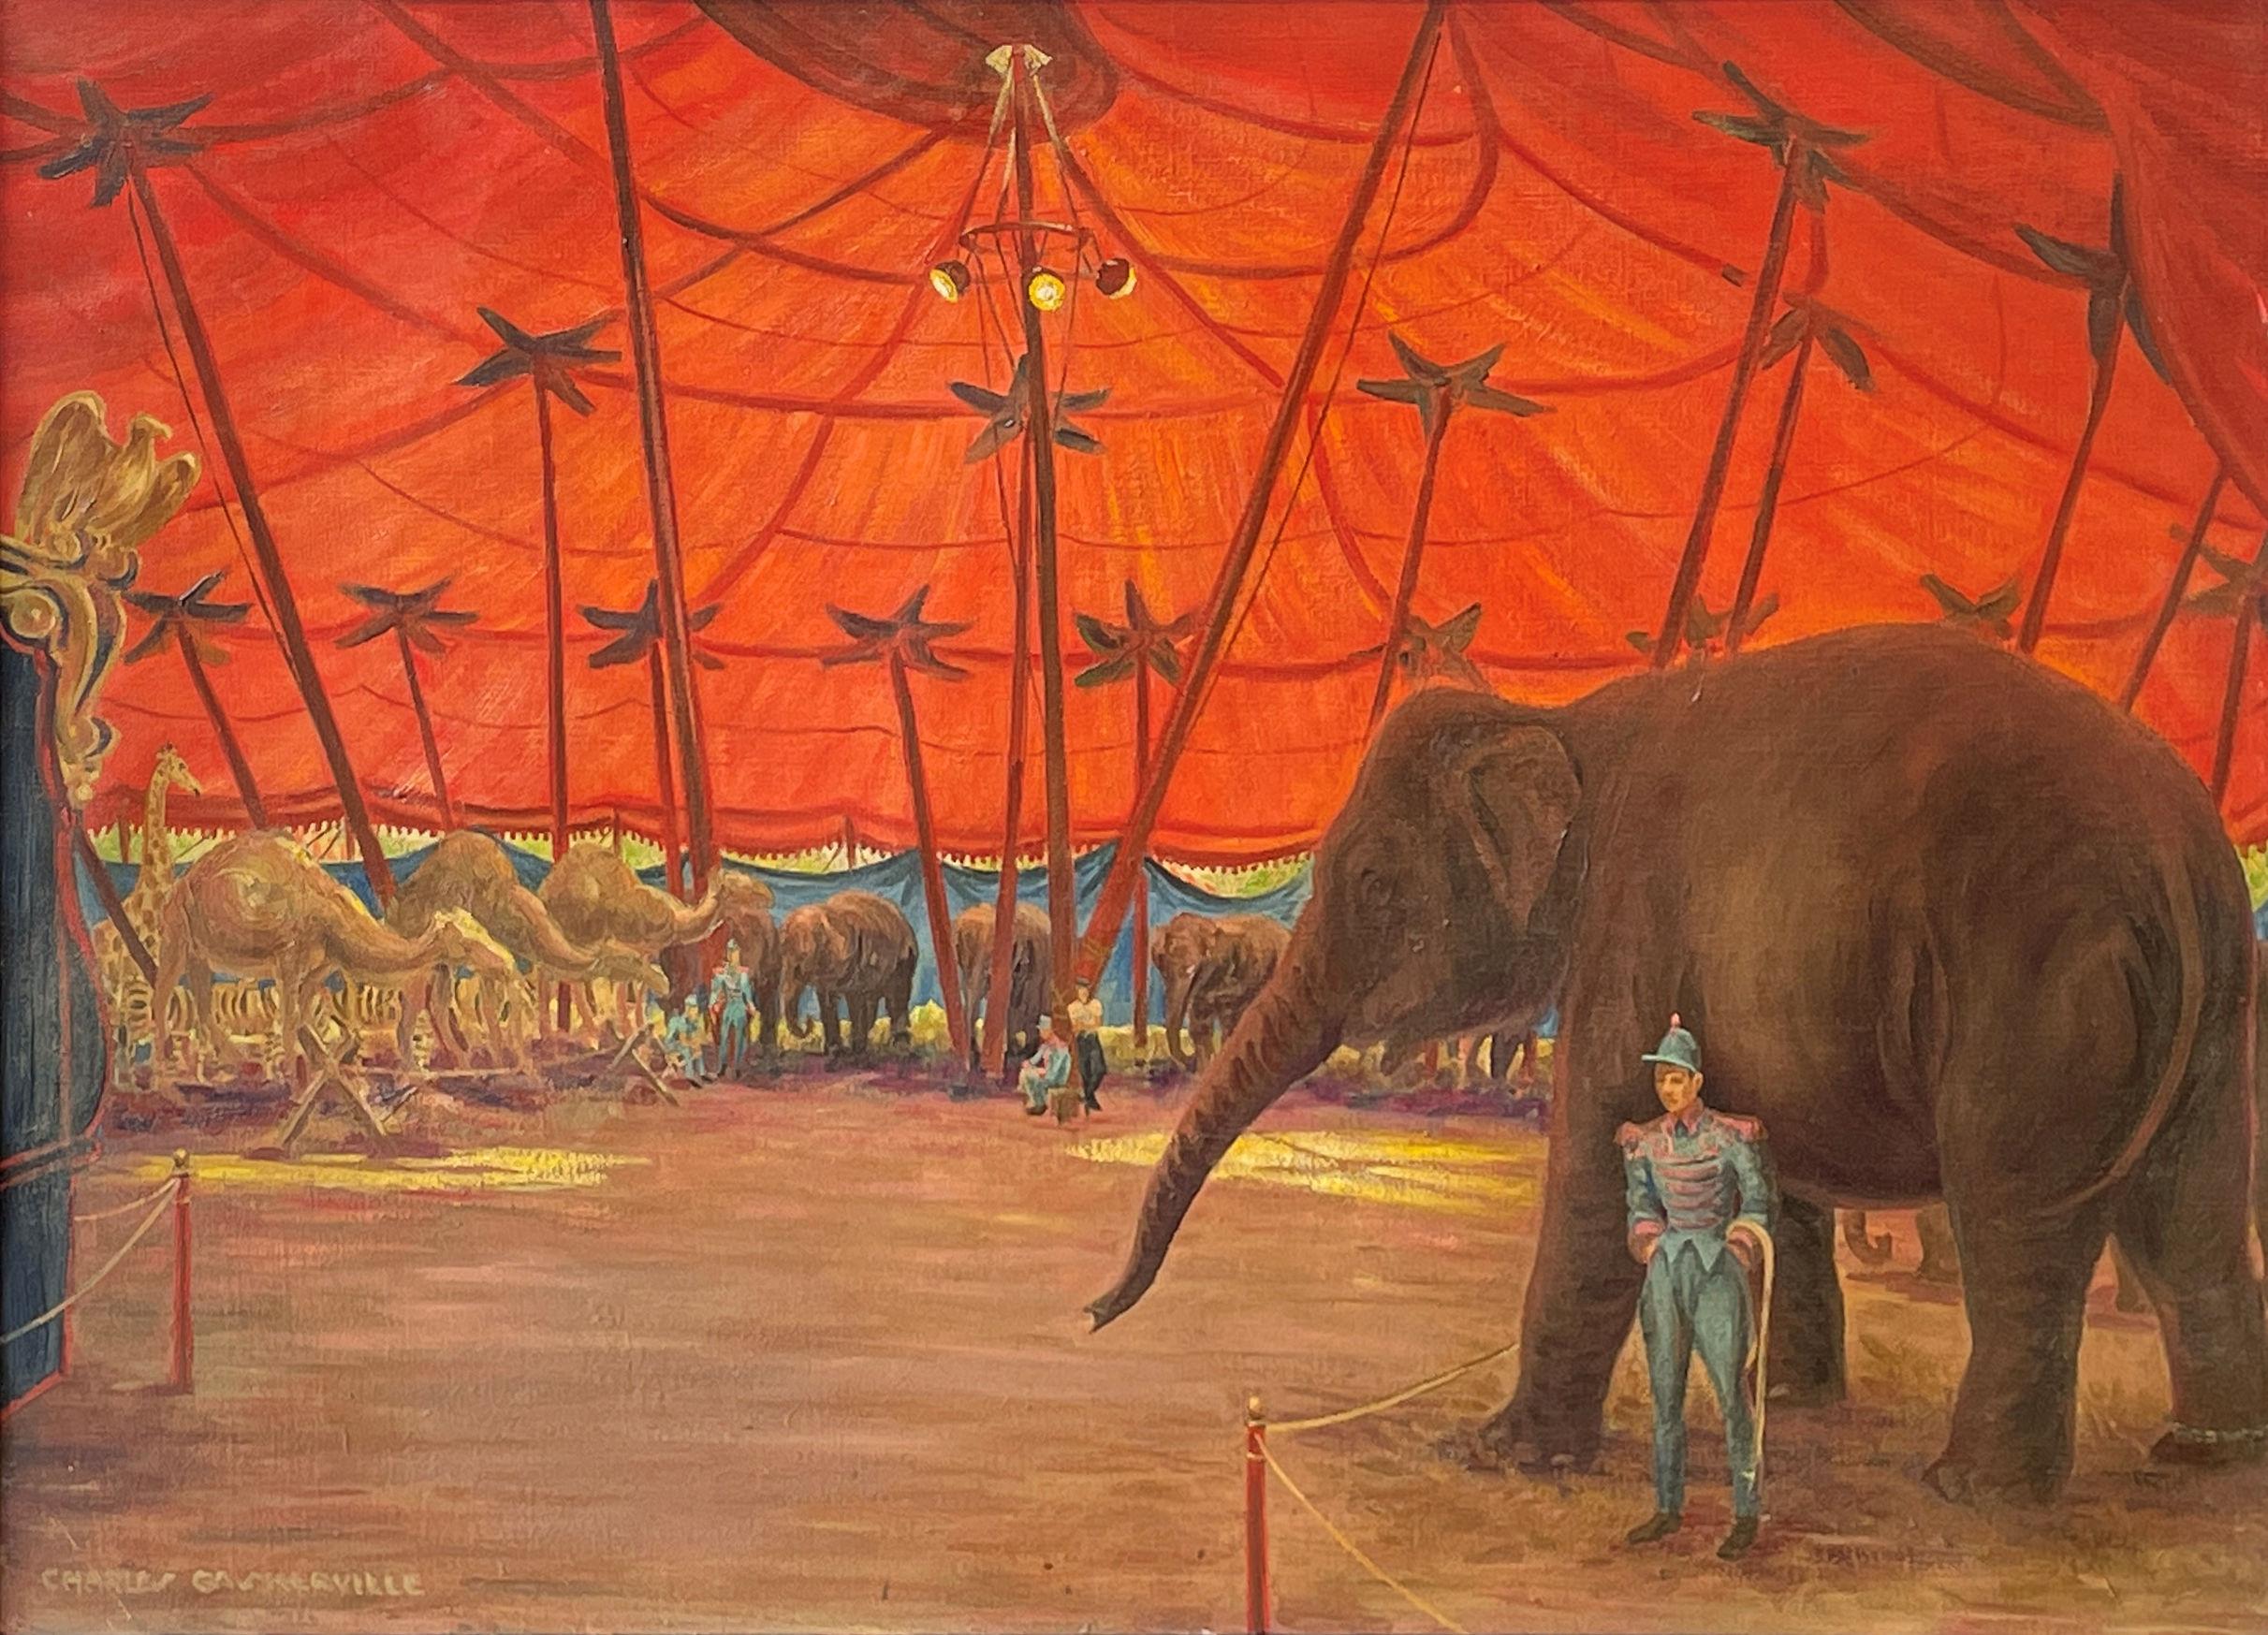 Charles Baskerville Jr. Animal Painting - "Menagerie Tent: Ringling Brothers Circus" Charles Baskerville, Elephants Camels